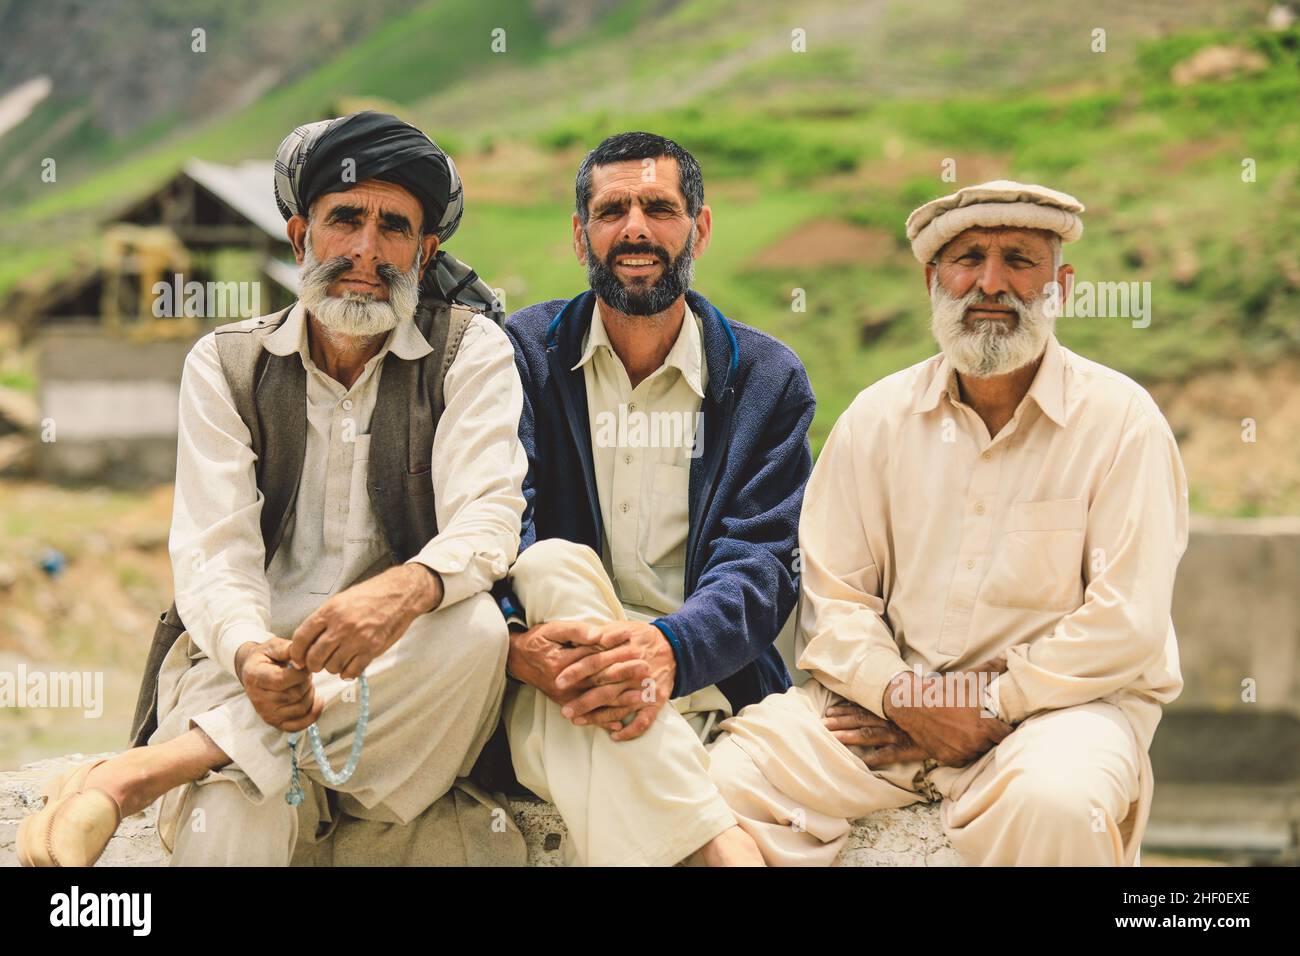 gilgit-pakistan-june-08-2020-group-of-an-pakistani-men-in-traditional-pakol-smiling-and-posing-for-the-picture-2HF0EXE.jpg